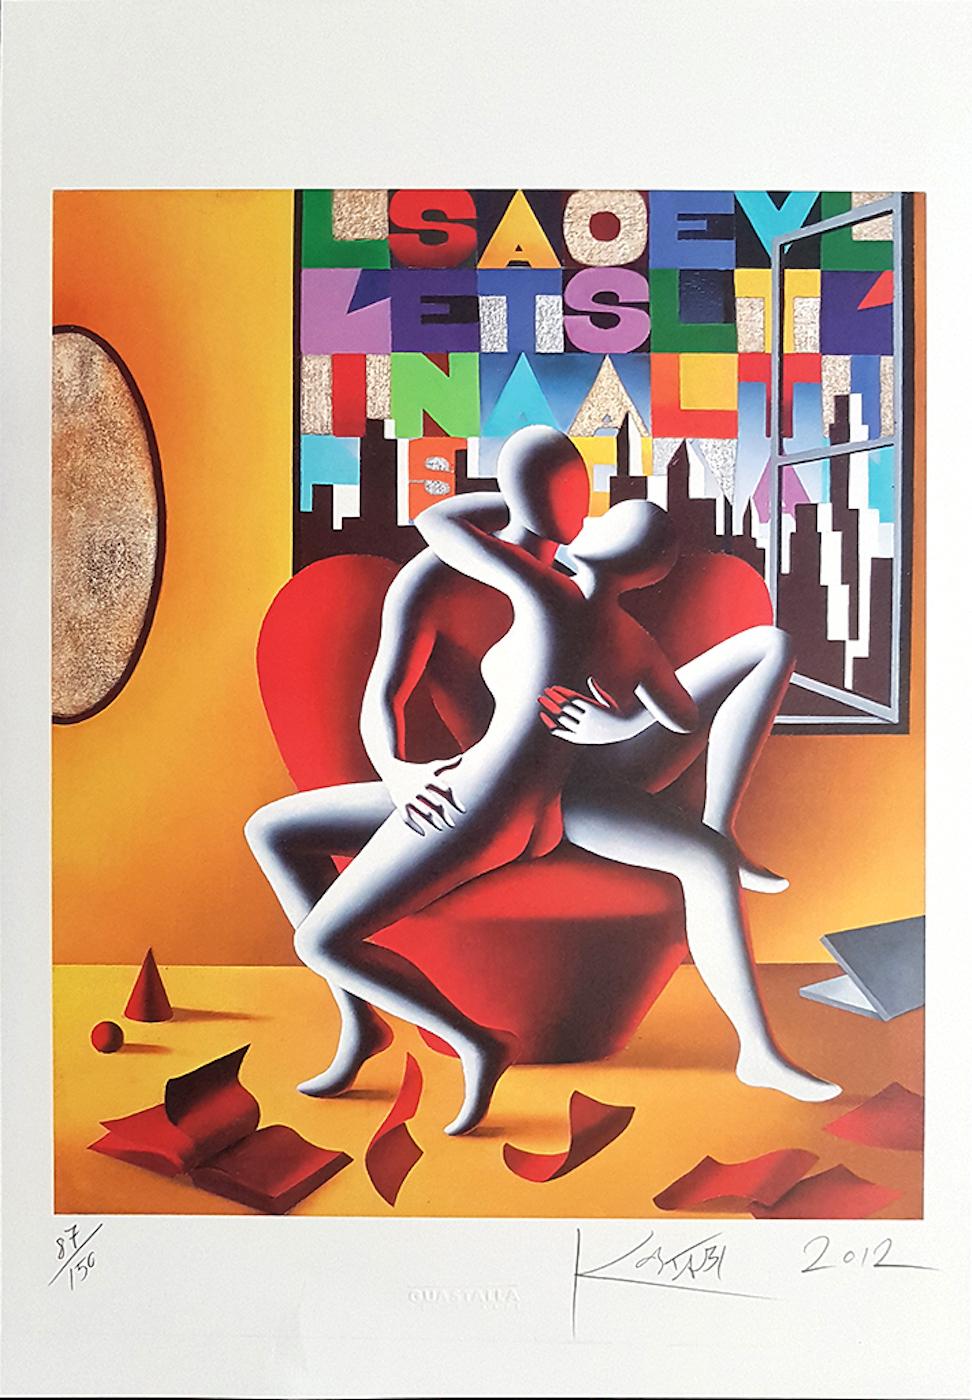 Image dimensions: 36.5x31 cm.
"The Book of Love" is an original print realized by Mark Kostabi in 2012. The artwork is hand signed, numbered and dated. This is an edition of 150 prints.

Mark Kostabi (b. 1960) is an American artist. He studied